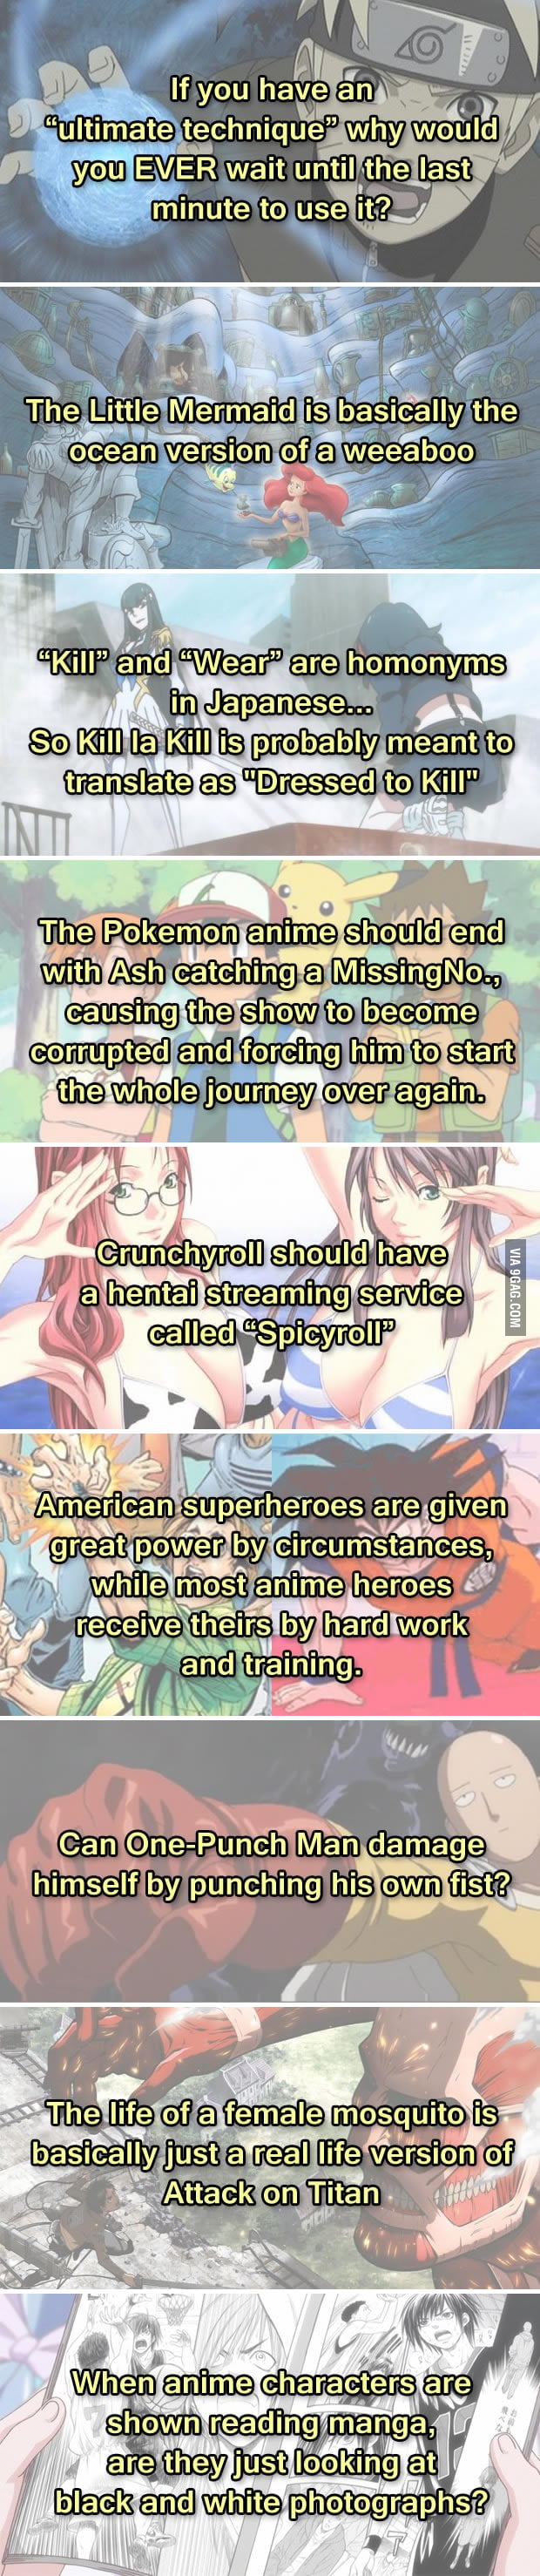 10 Anime Shower Thoughts That Will Change Your Laifu - 9GAG